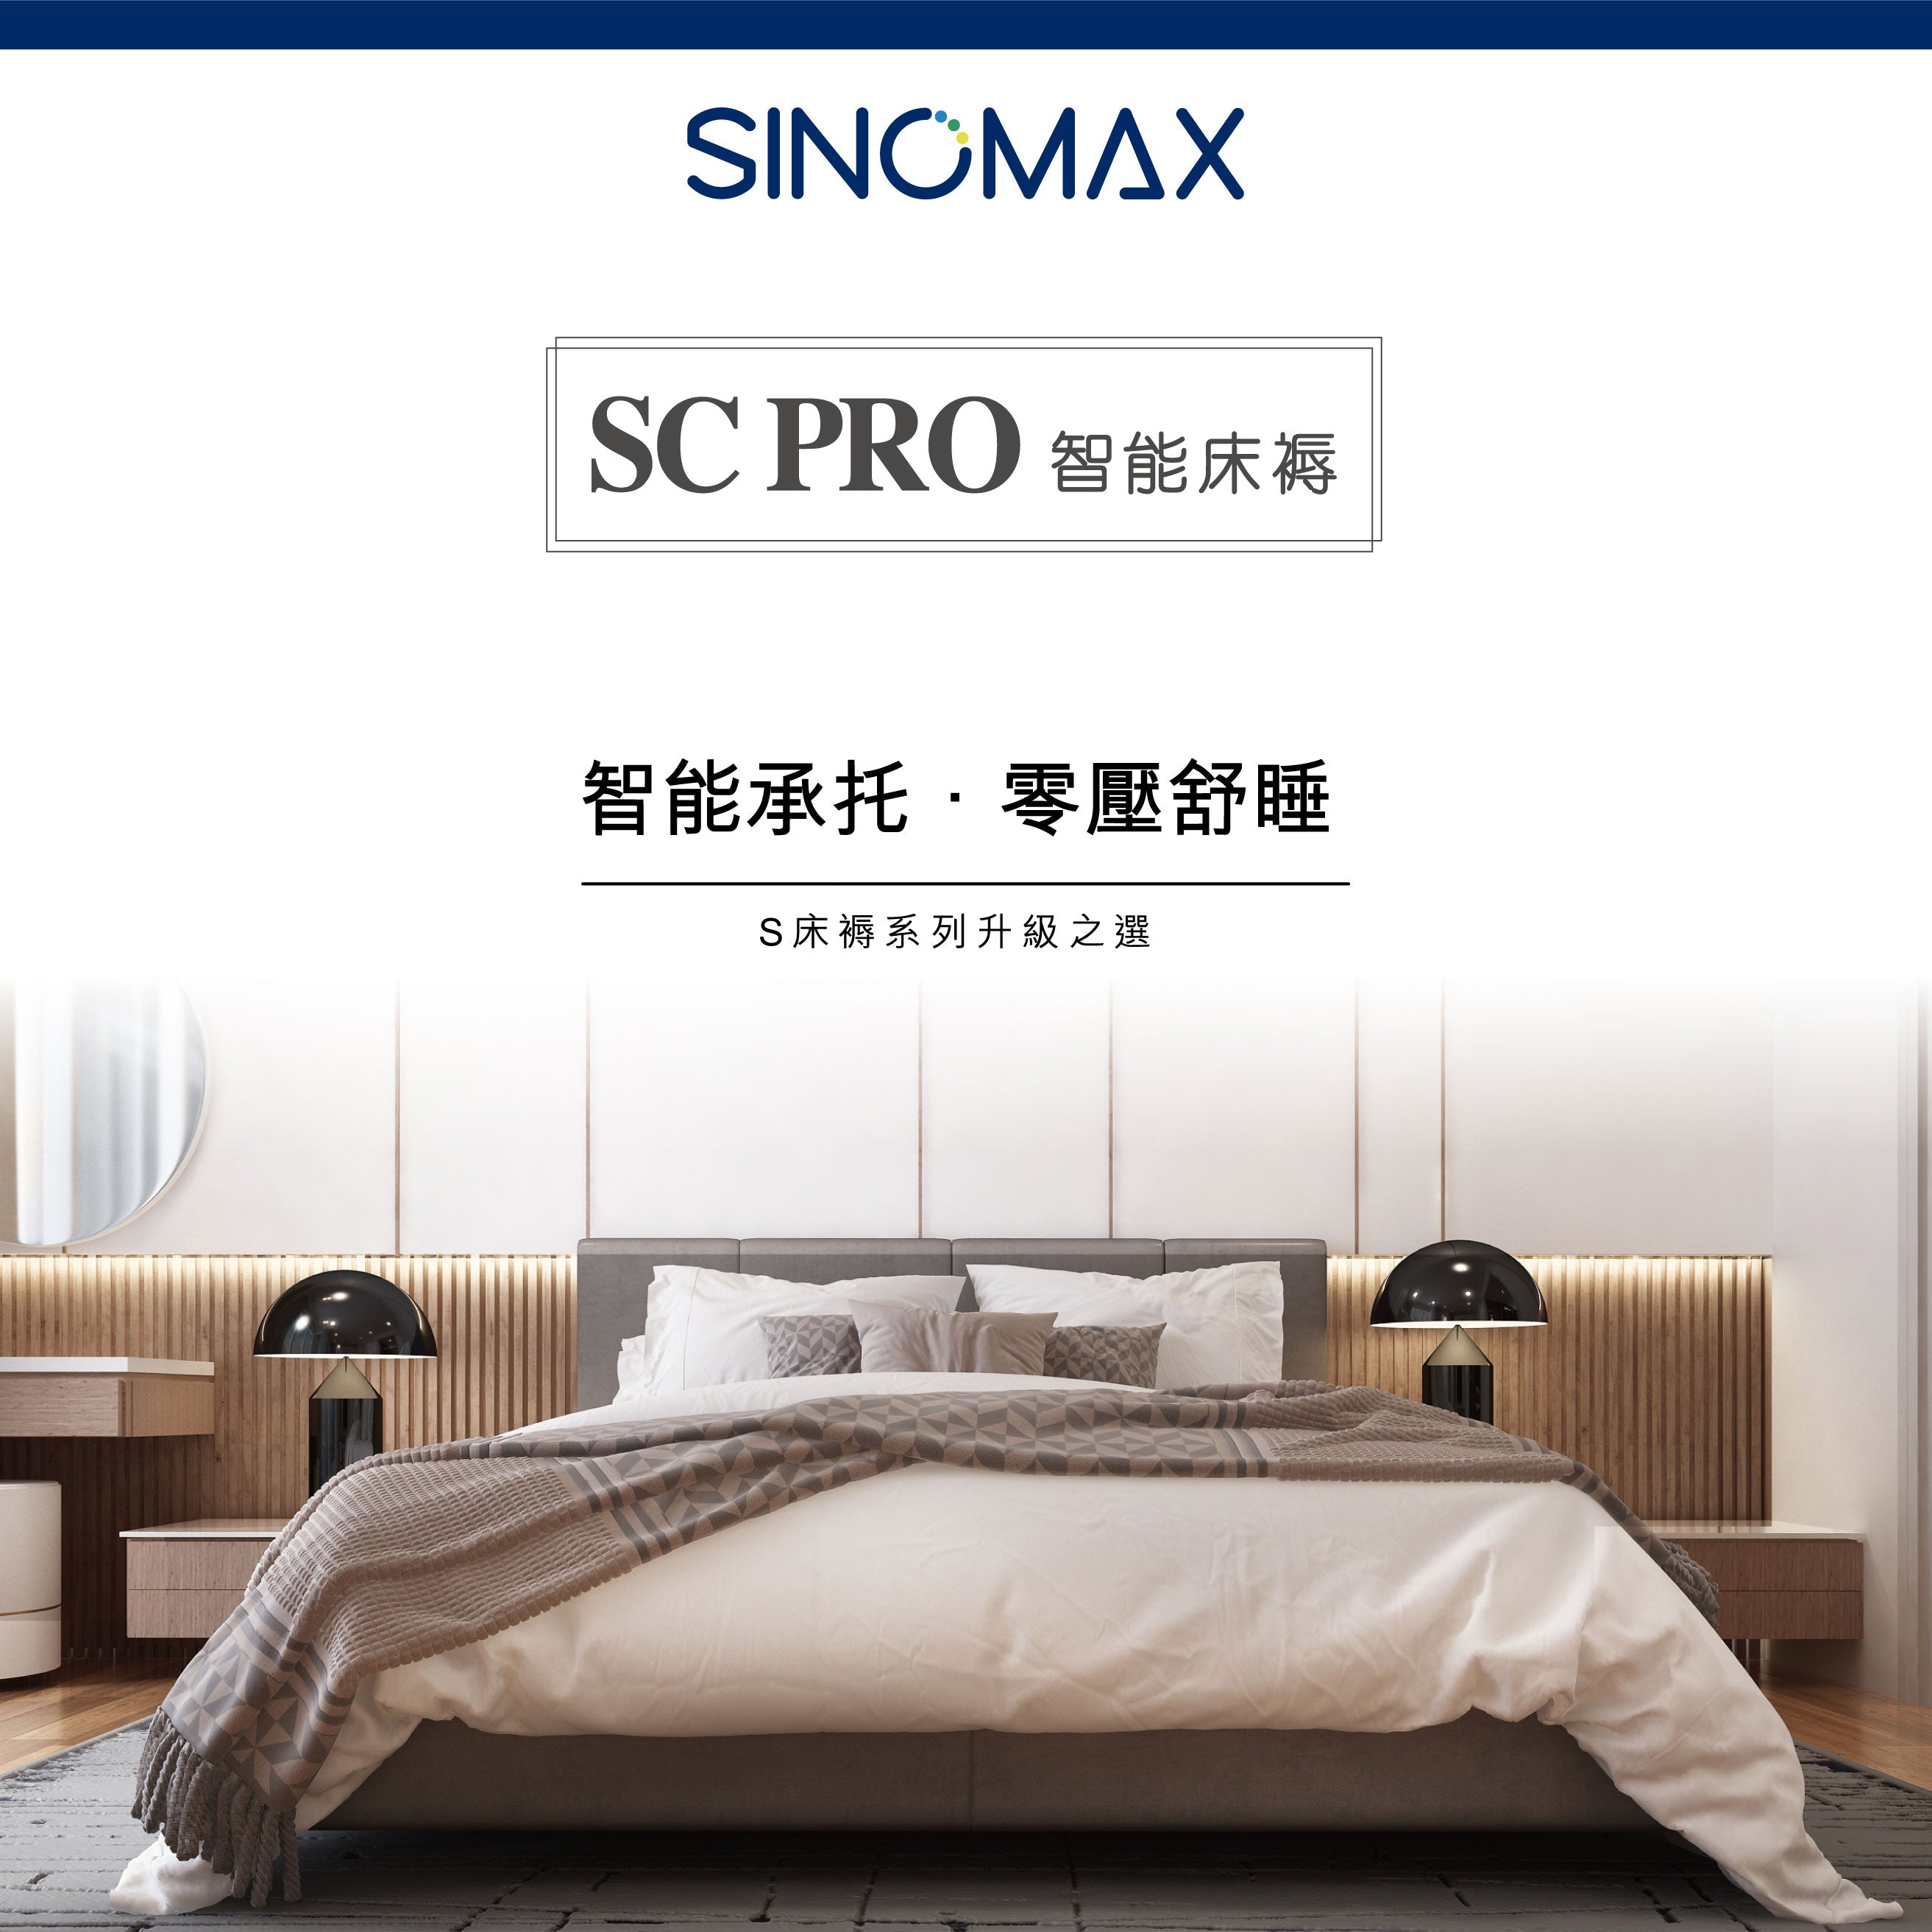 SC Pro Mattress - Tailor-made size (Above 48" W)            